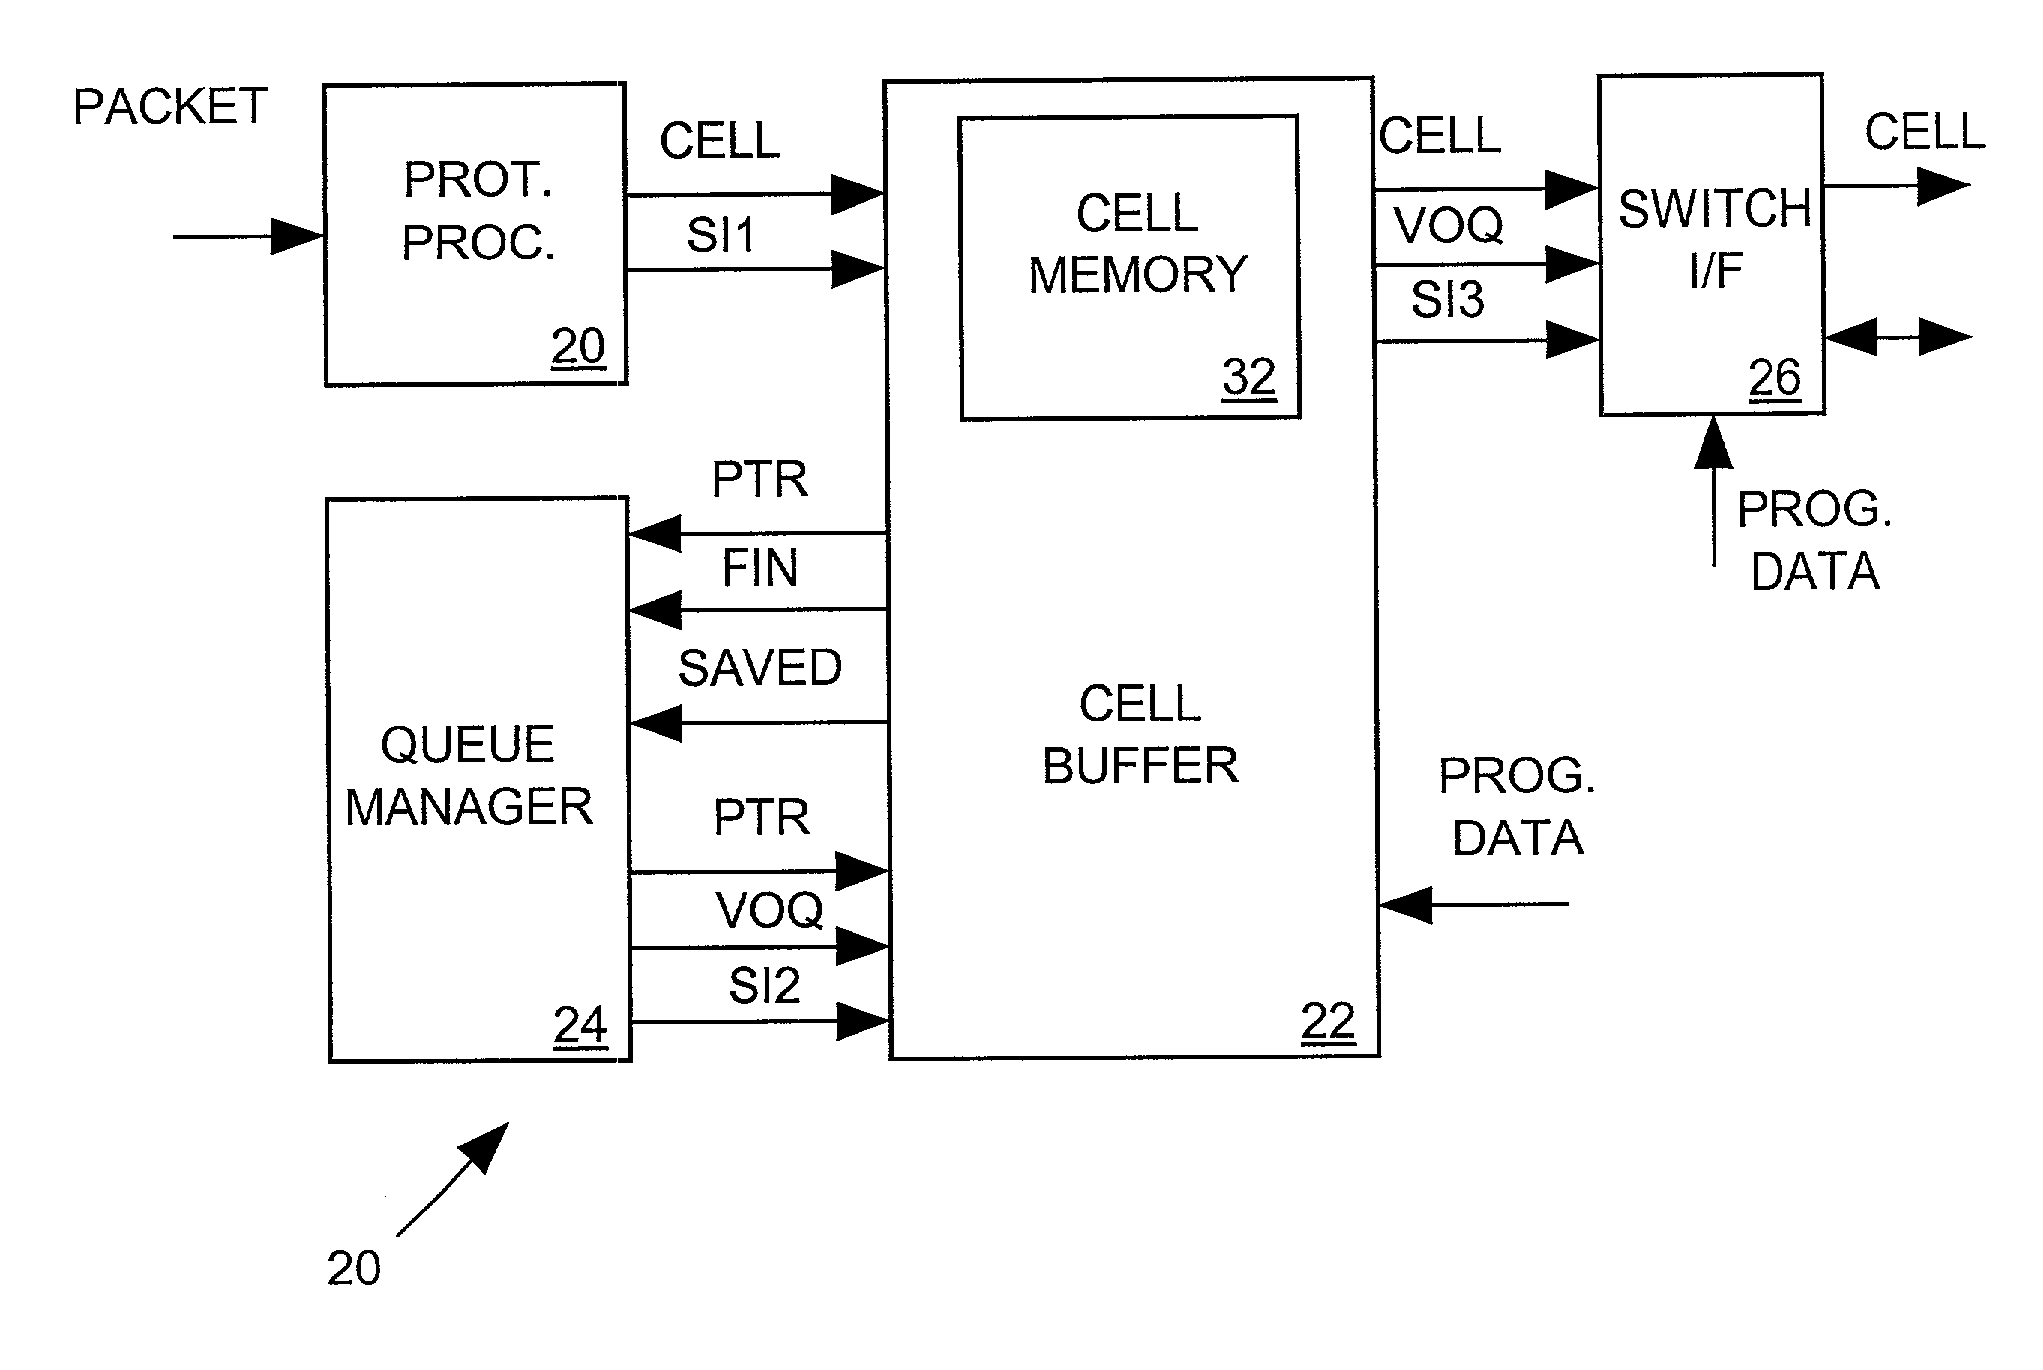 Multicast cell buffer for network switch